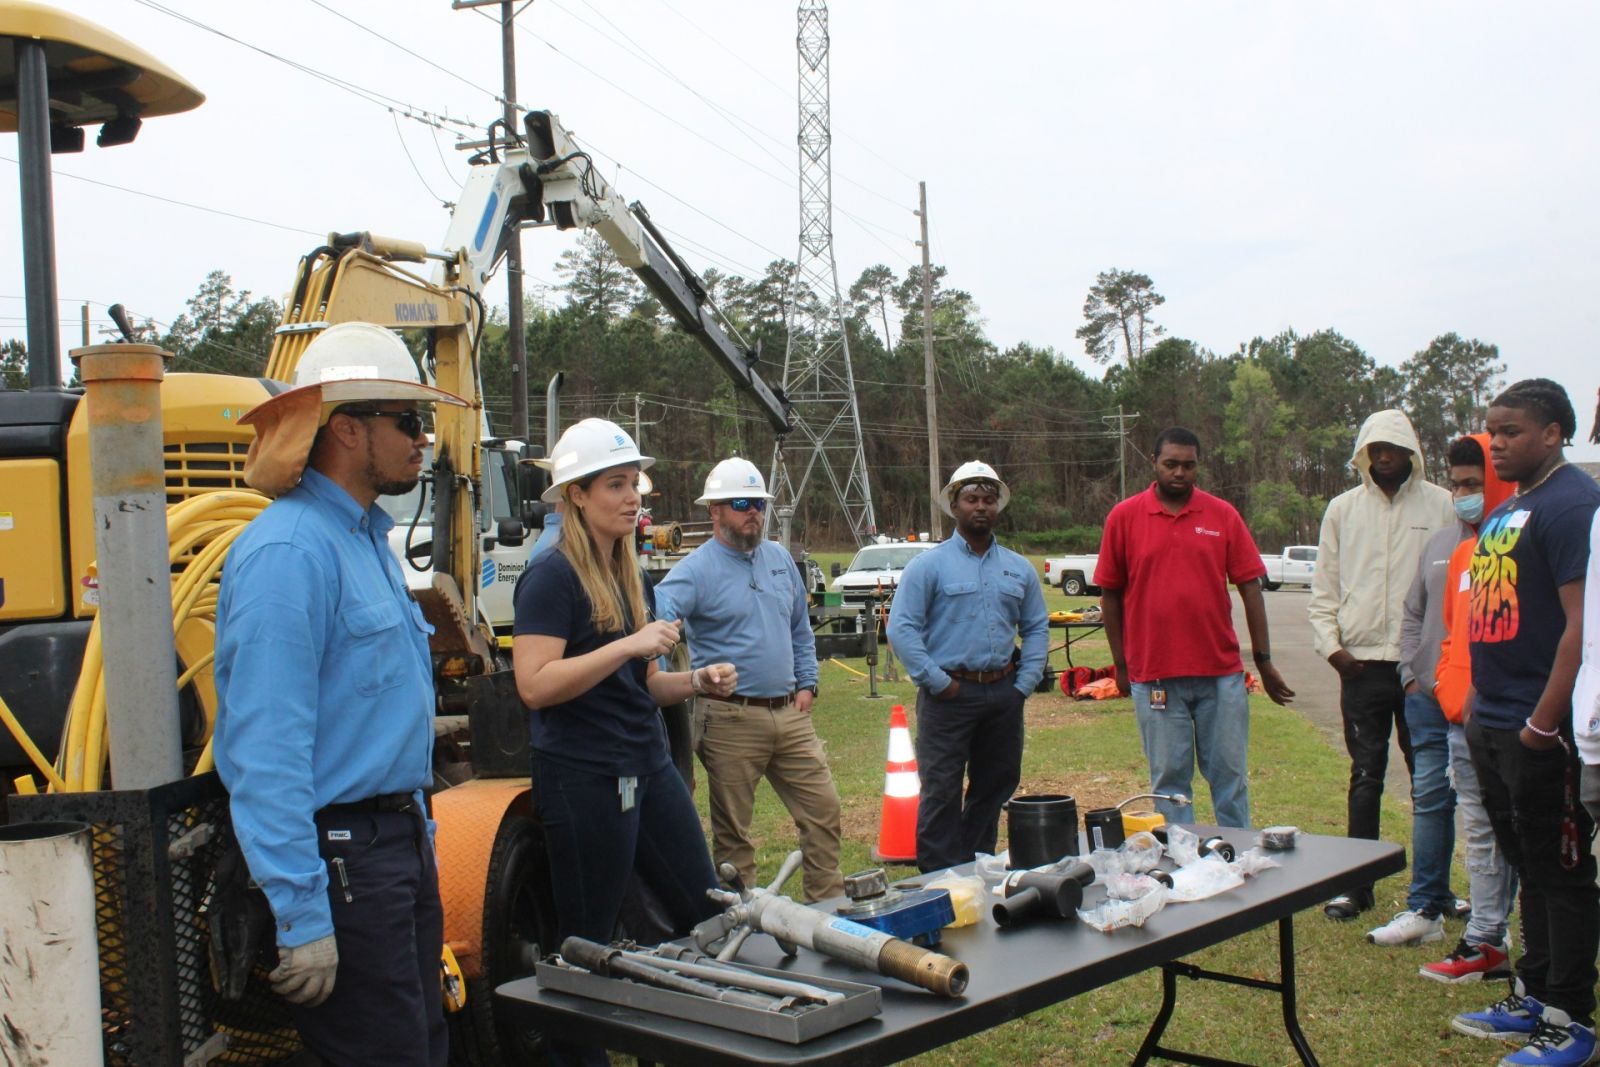 Dominion Energy gas operations employees explain their jobs and the equipment they use to students participating in the company‰Ûªs Skilled Craft Career Day on March 24 at Lake Murray Training Center. The event drew students from Richland, Fairfield and Orangeburg counties, who learned about utility industry careers. (Photo/Christina Lee Knauss)